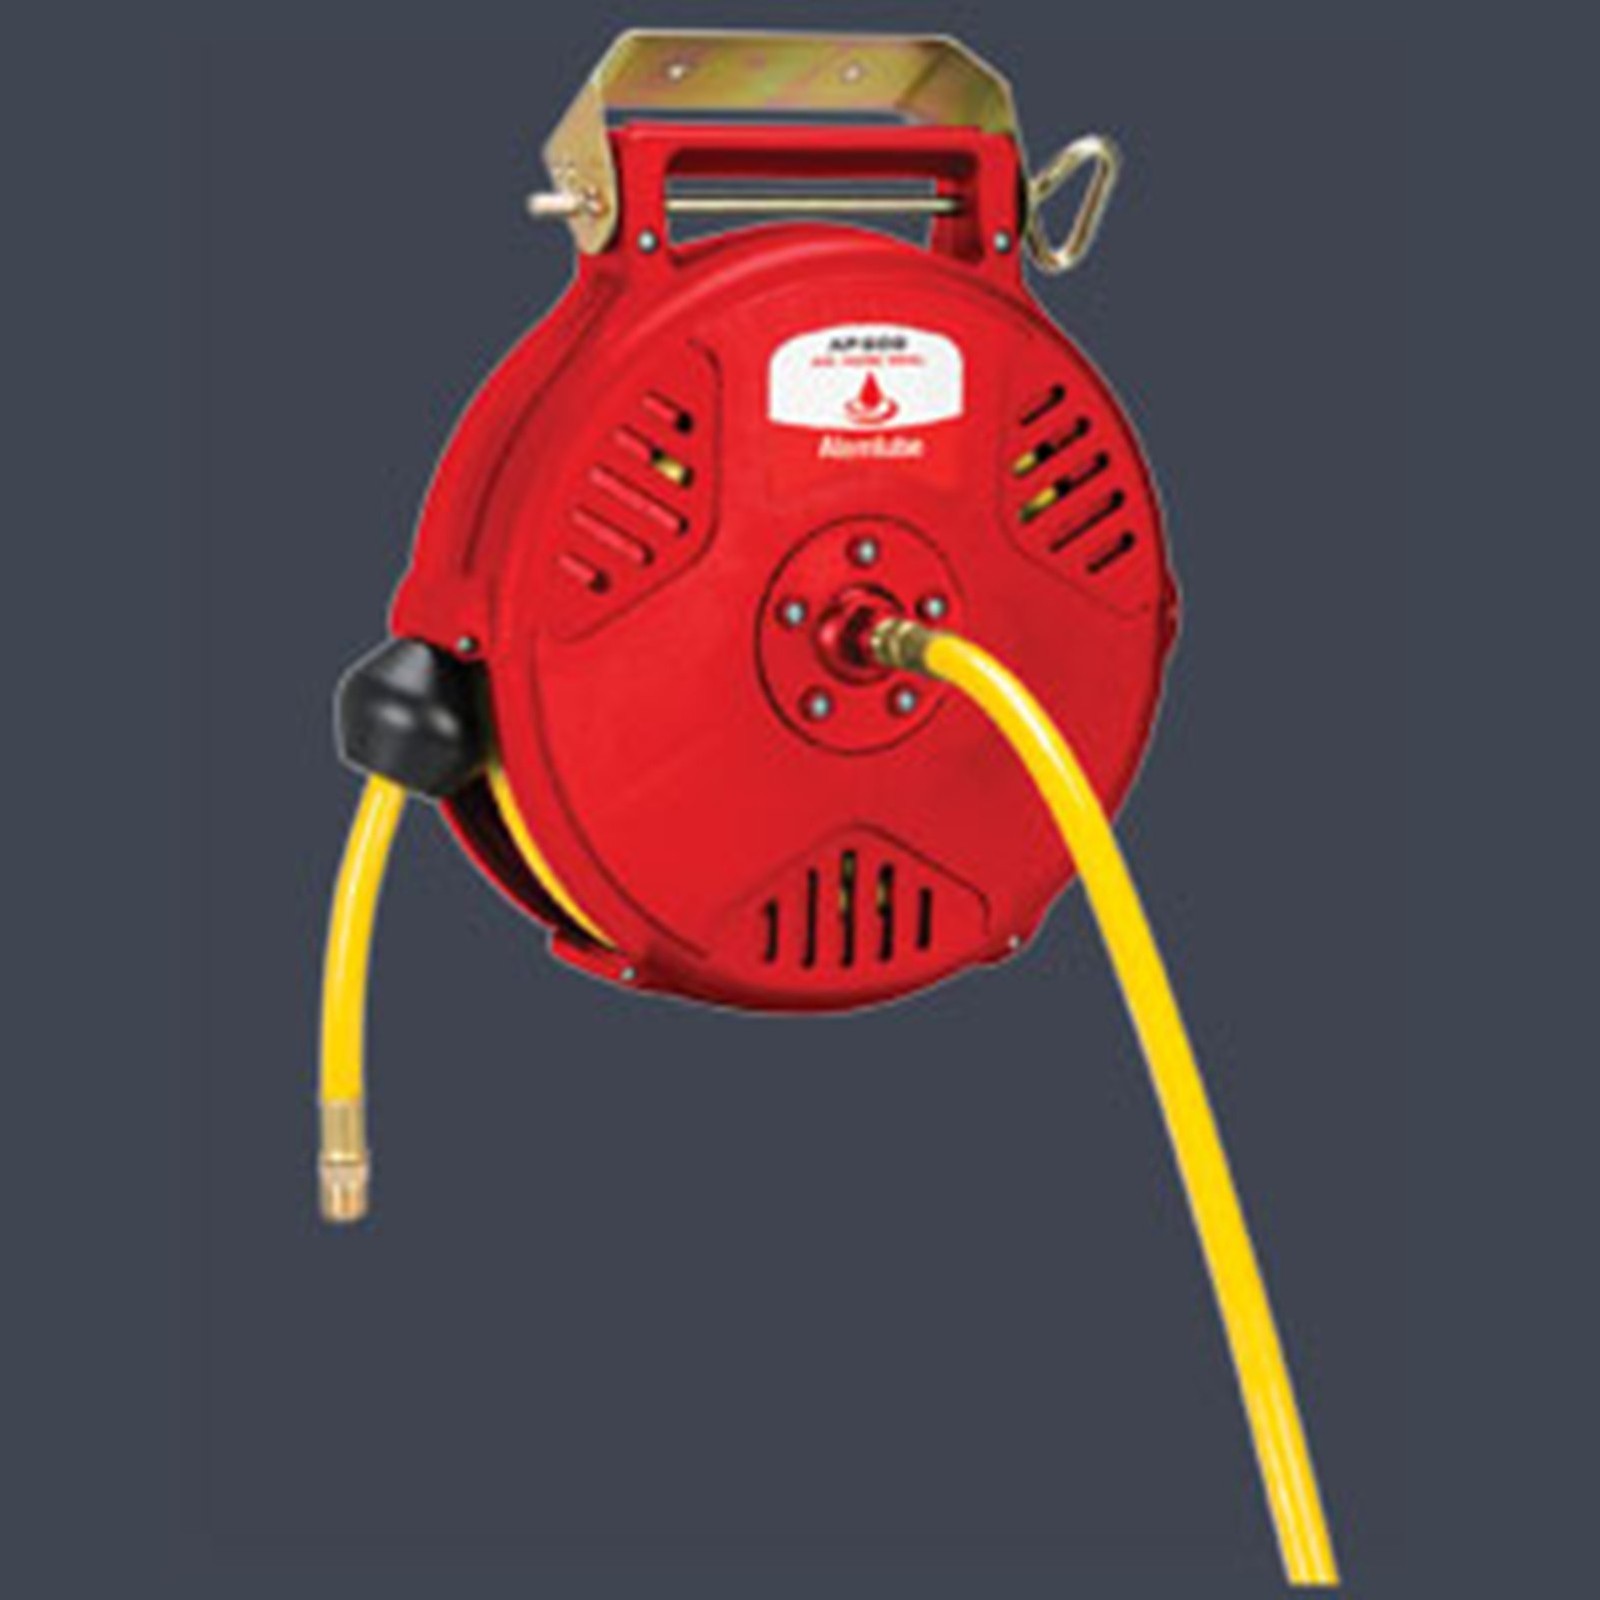 COMPACT AIR HOSE REEL 9M WORKING LENGTH BY 10MM ID HOSE